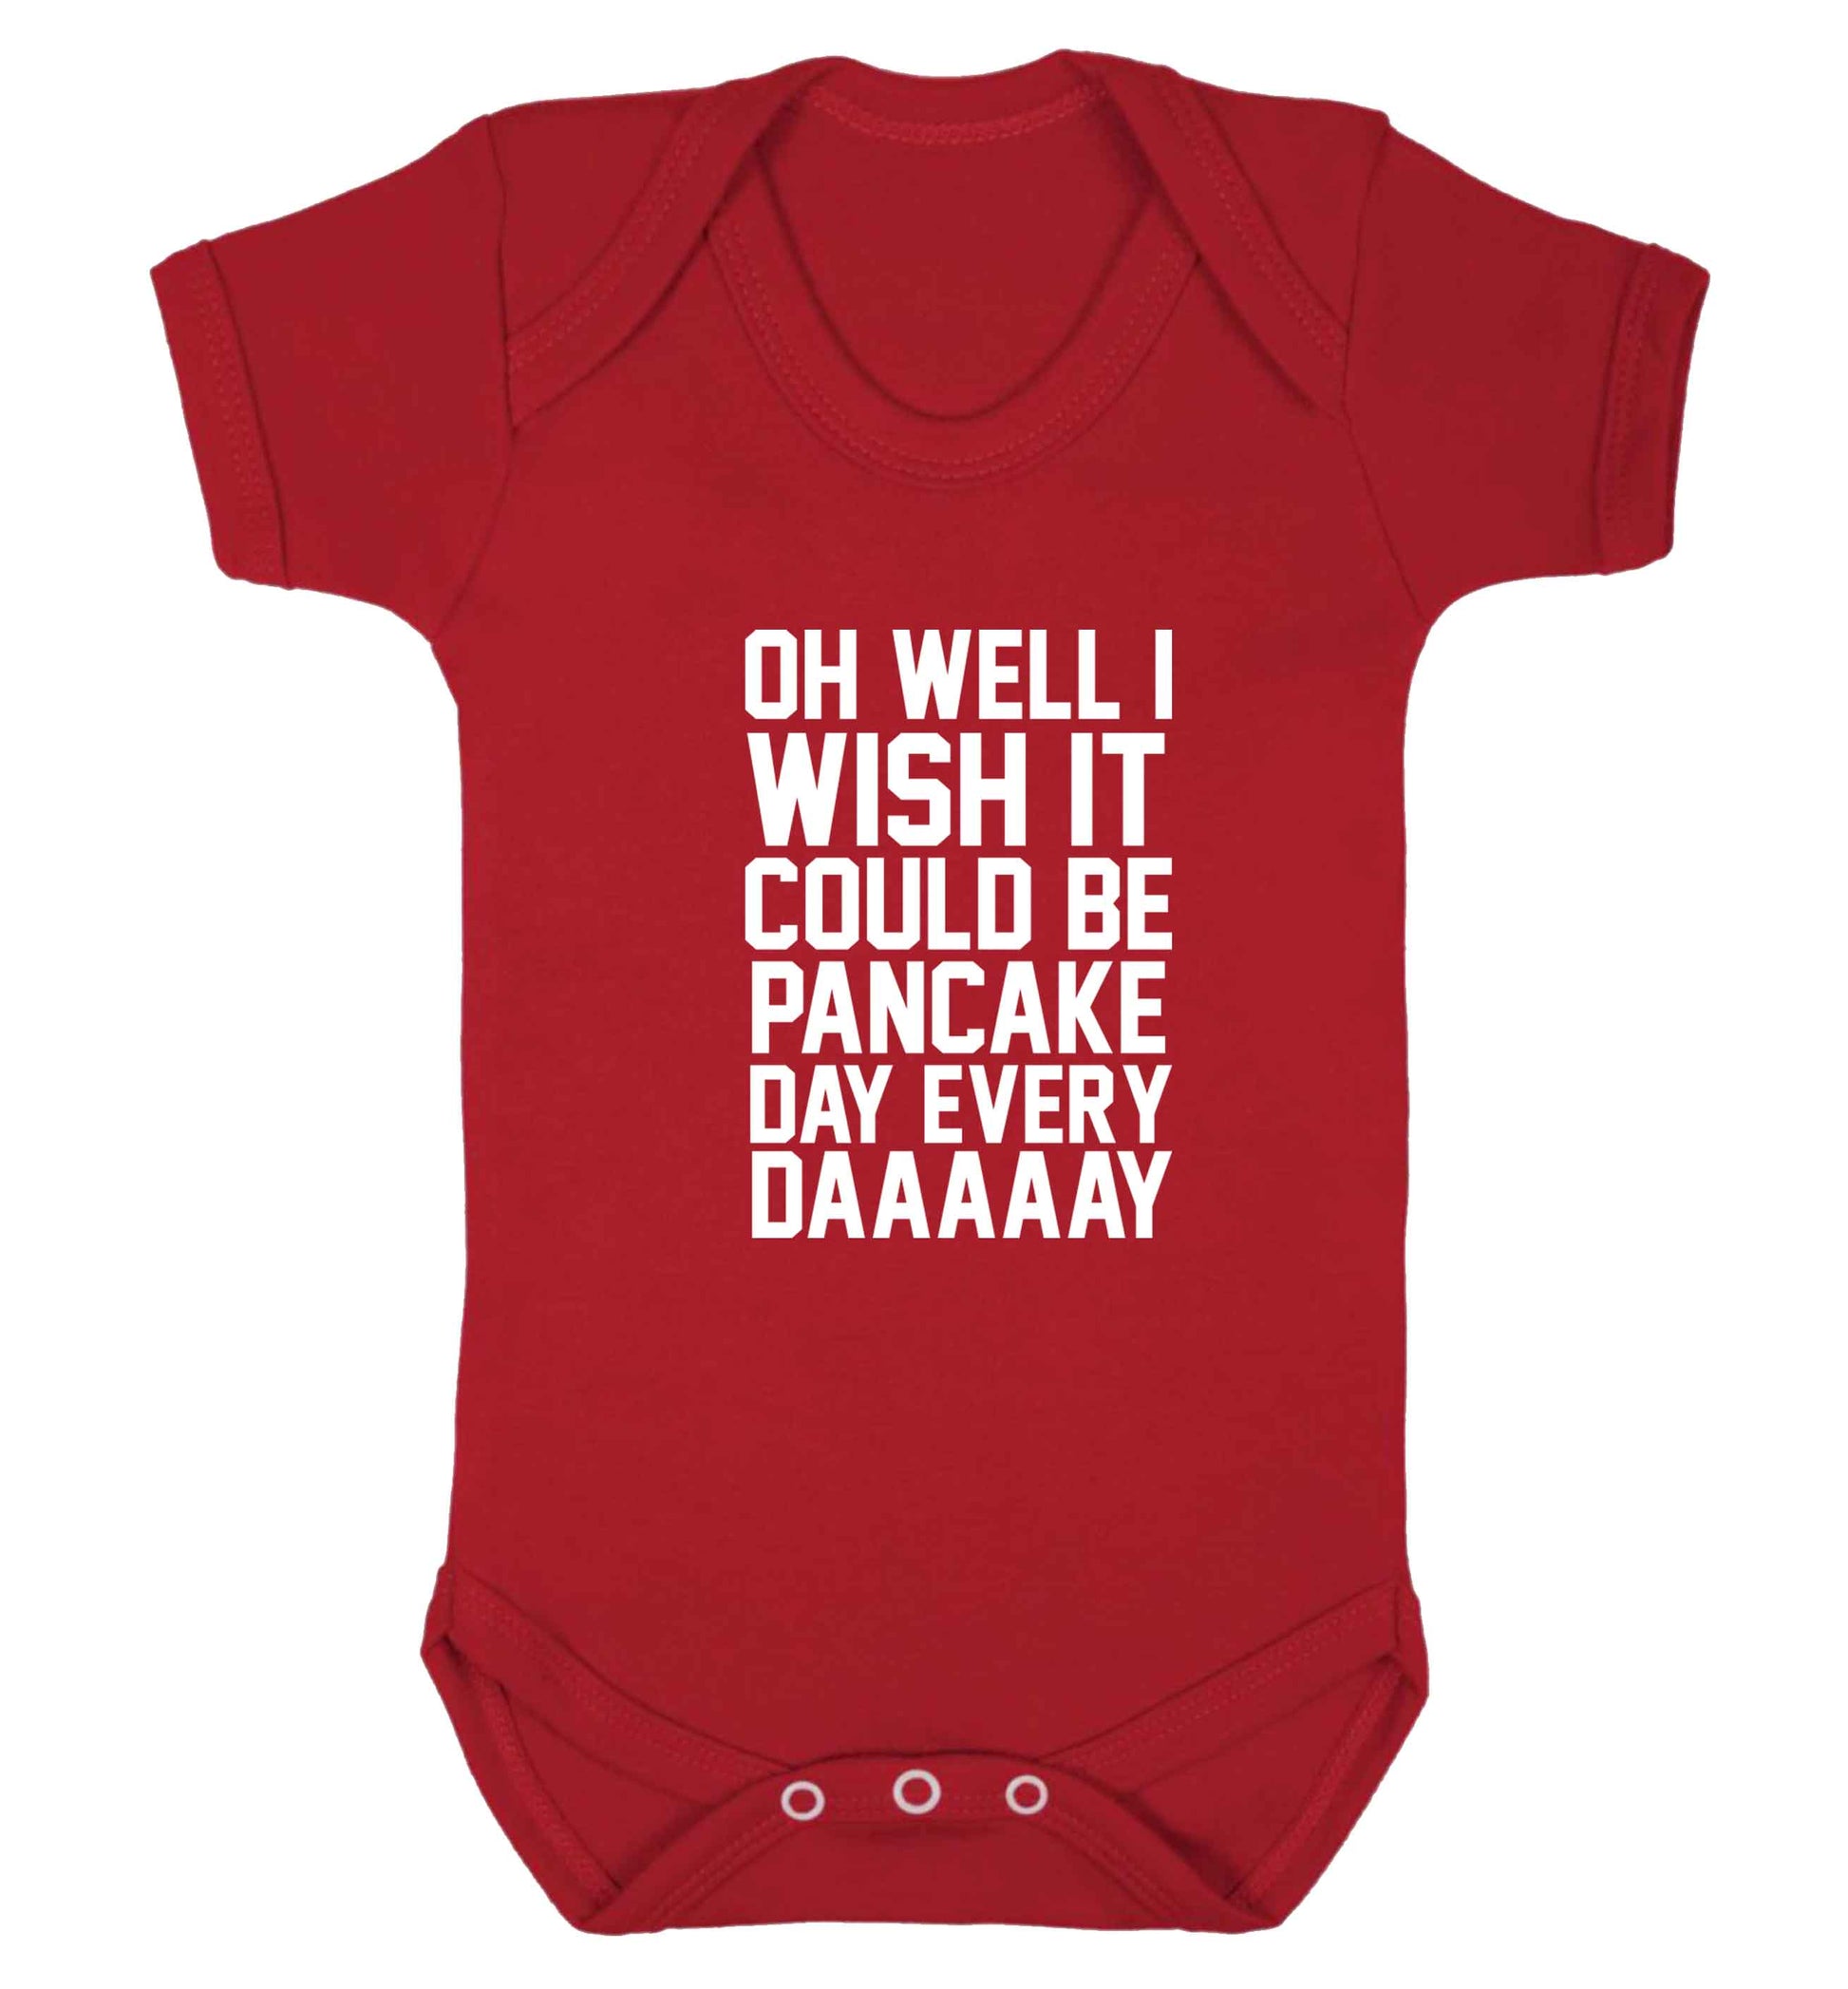 Oh well I wish it could be pancake day every day baby vest red 18-24 months